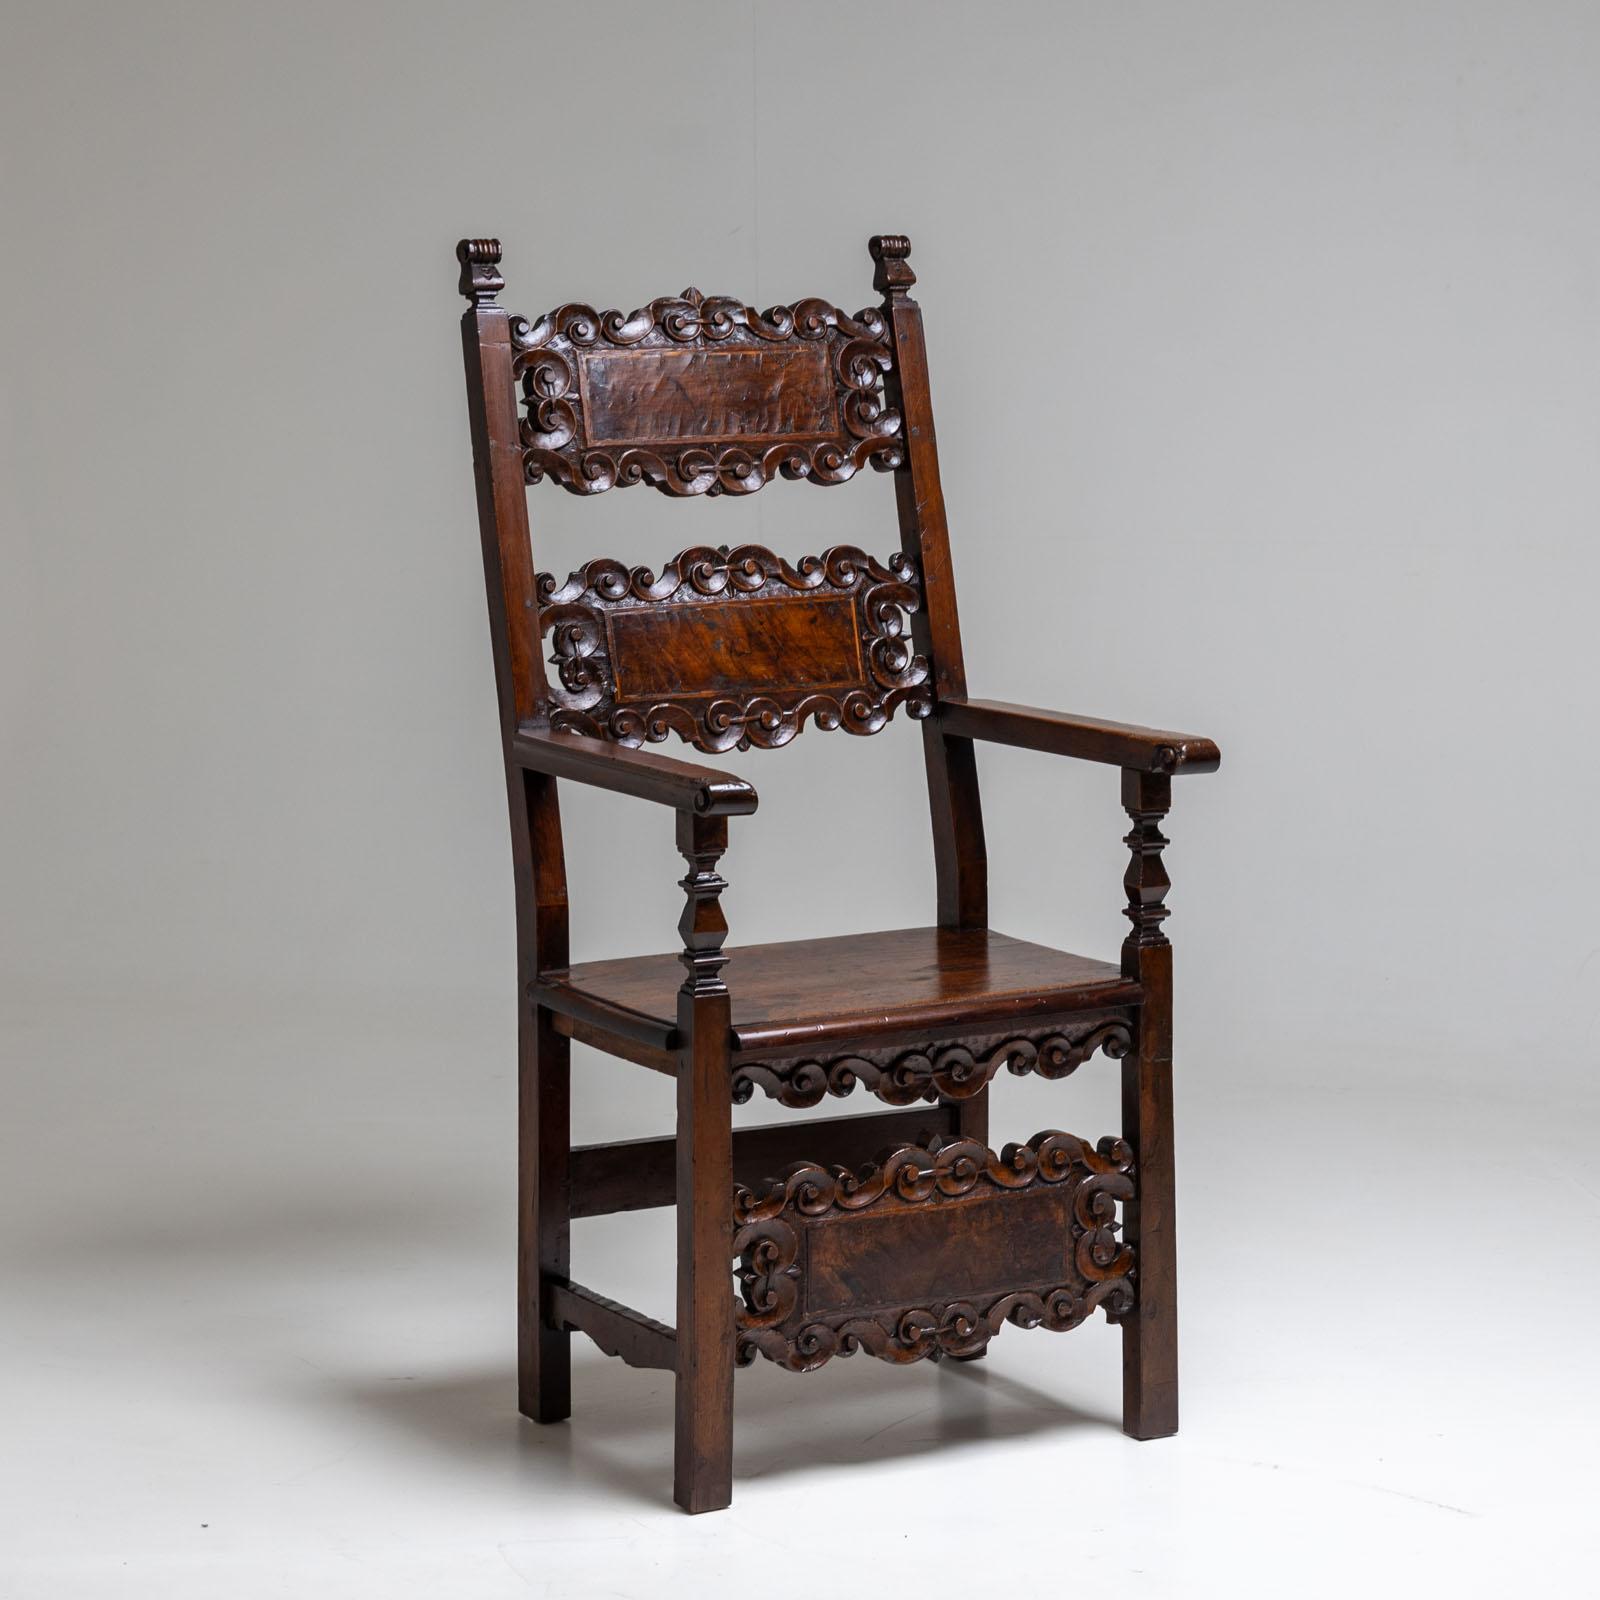 Armchair made of solid walnut with carved pinnacles and volute-decorated intermediate struts on the backrest and front legs. The straight armrests rest on baluster-shaped supports. Beautiful authentic patina.